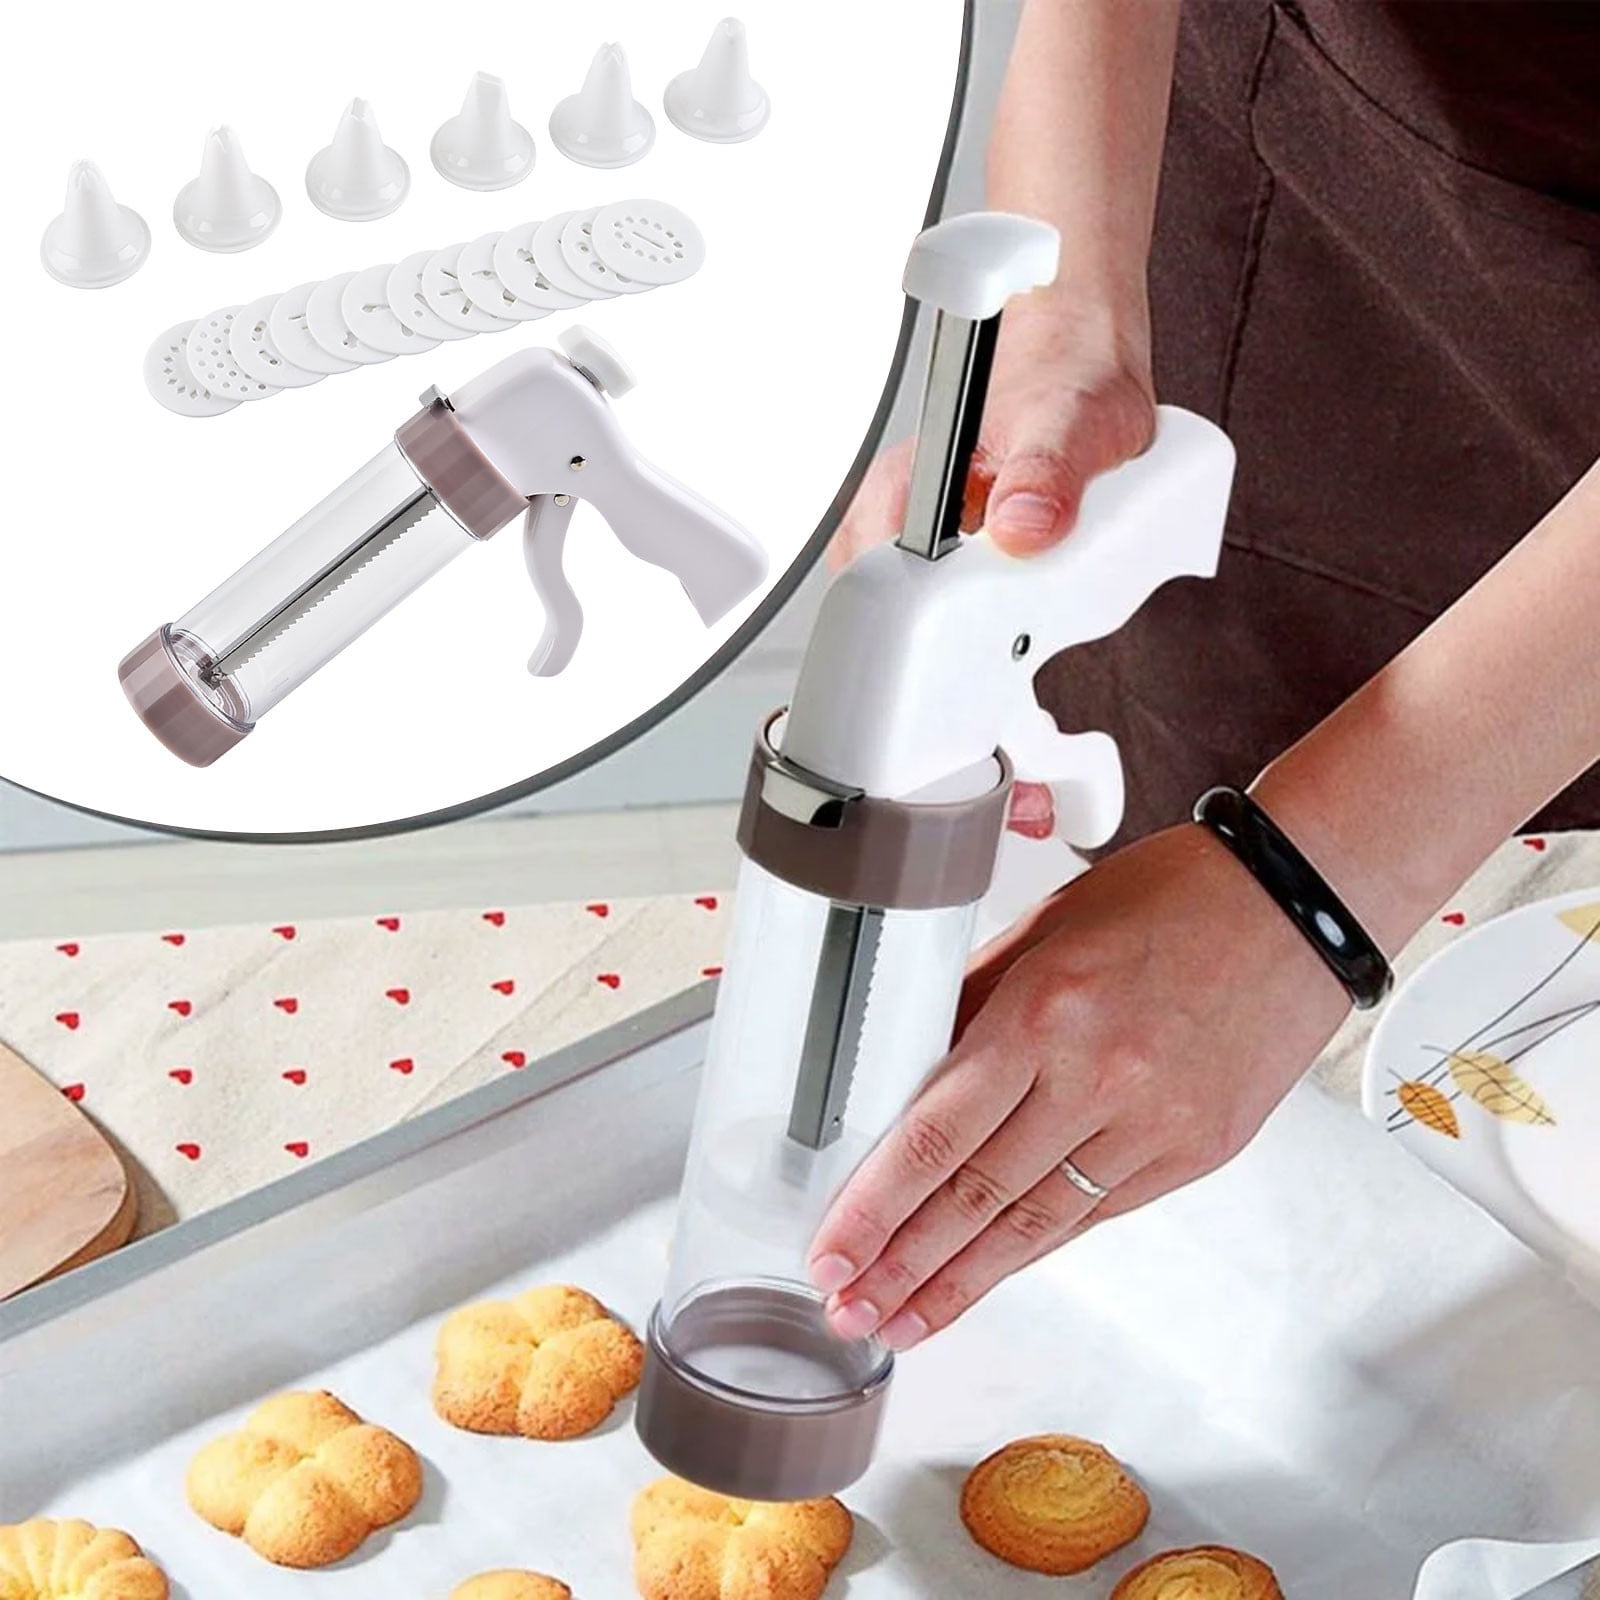 Fondant Extruder: Baking Quick Tip from Cookies Cupcakes and Cardio 